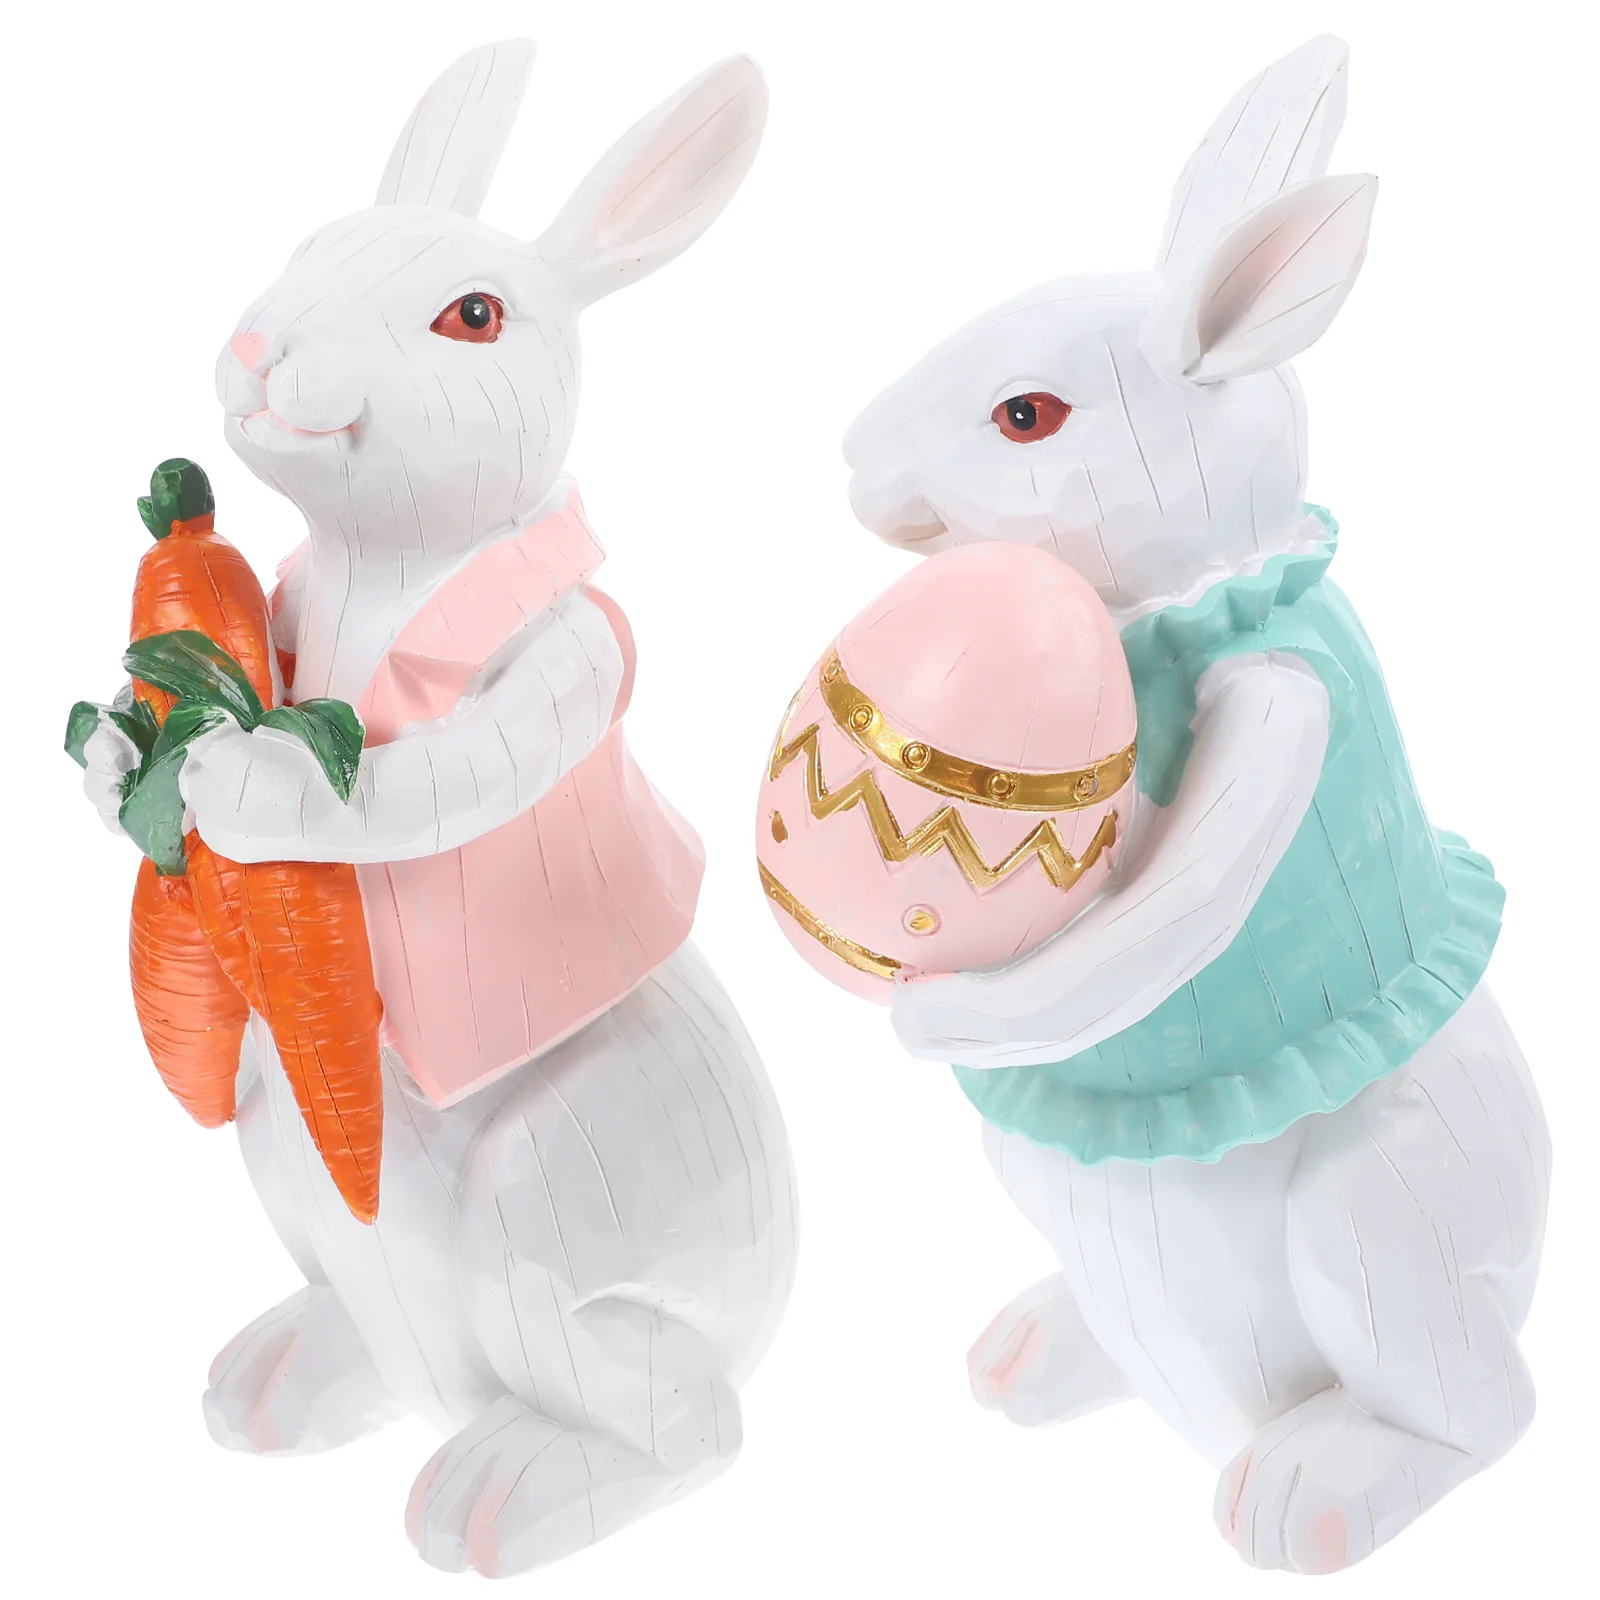 

Easter Bunny Rabbit Decorations Decor Statues Statue Garden Figure Toy Resin Ornament Centerpiece Tabletop Figurines Year Spring